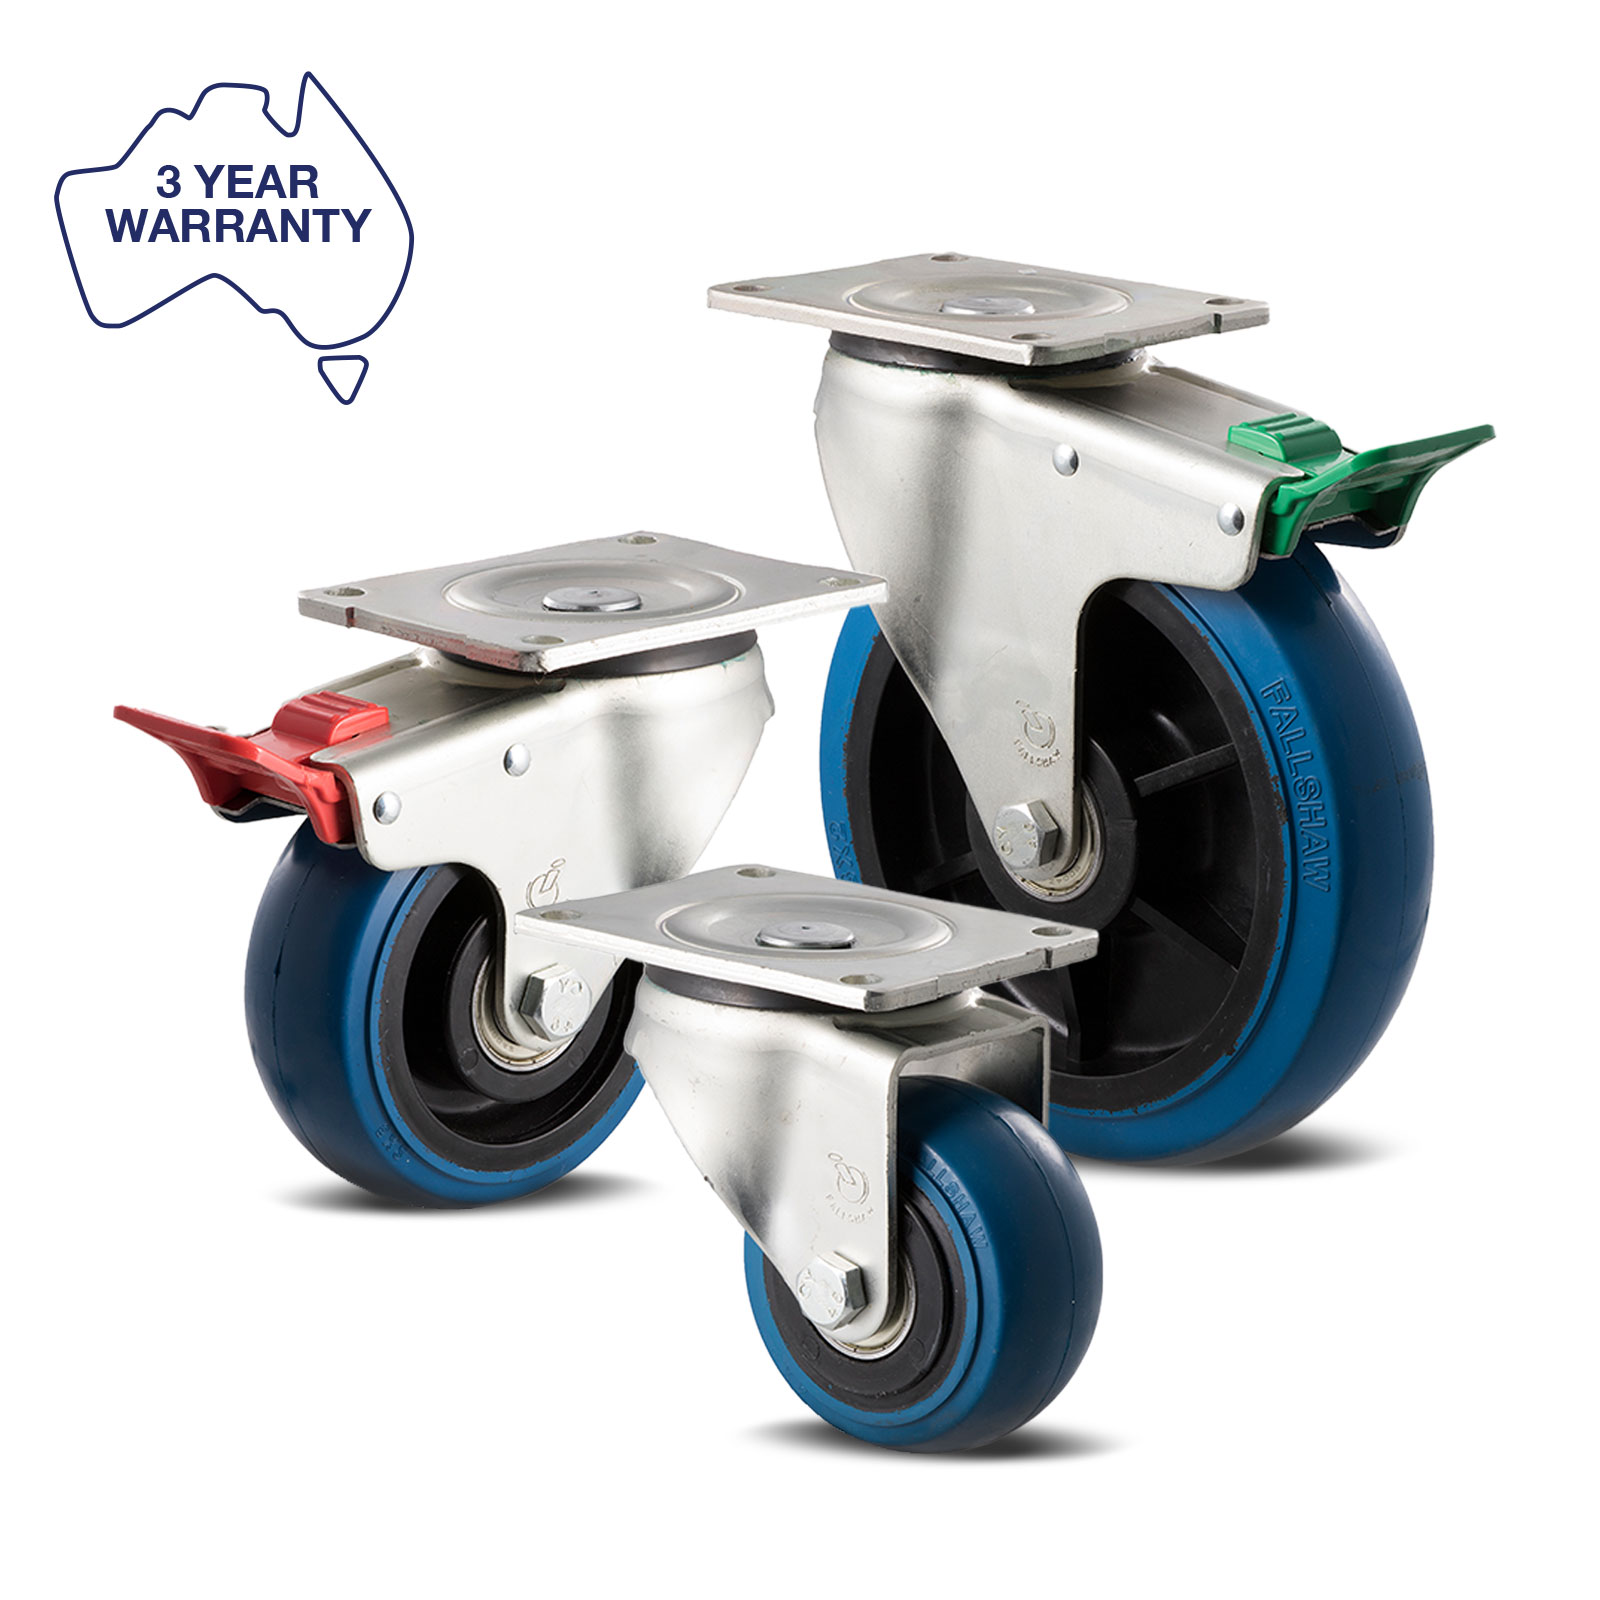 OBQ castors with high-resilience blue rubber wheels